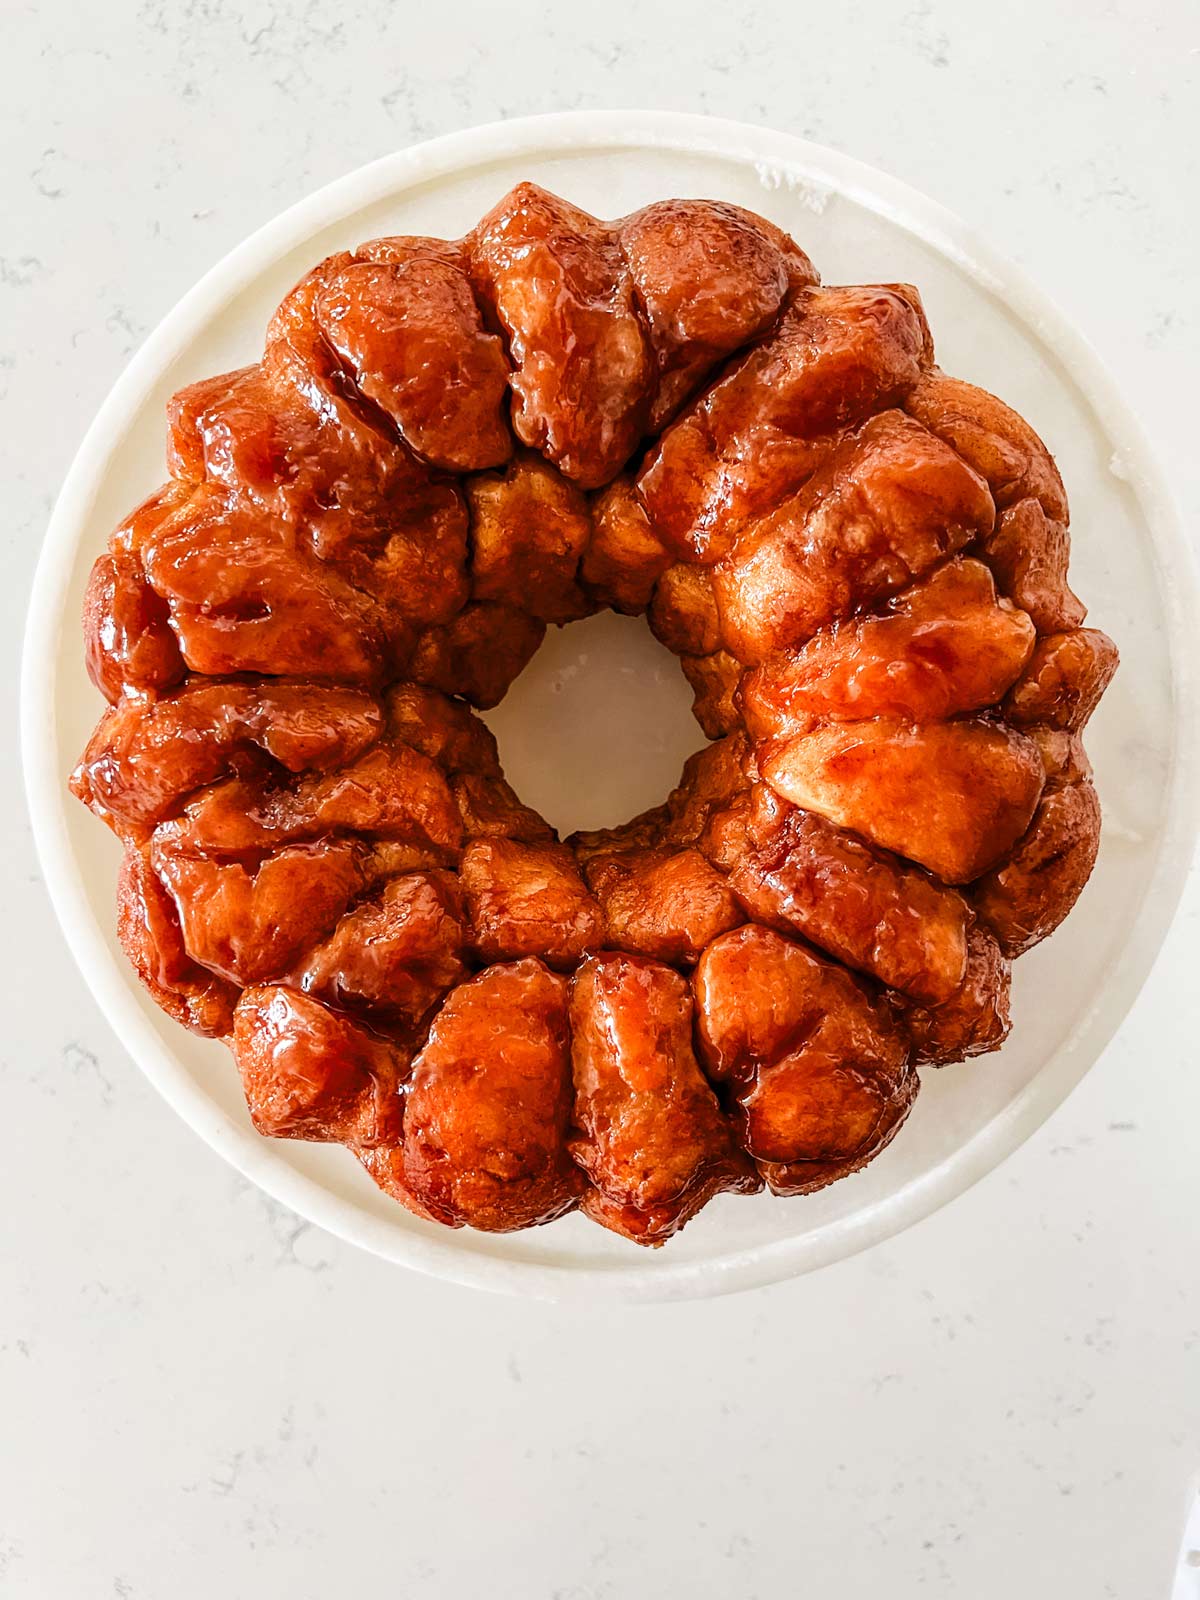 Unglazed monkey bread strait from the pan on a cake stand.